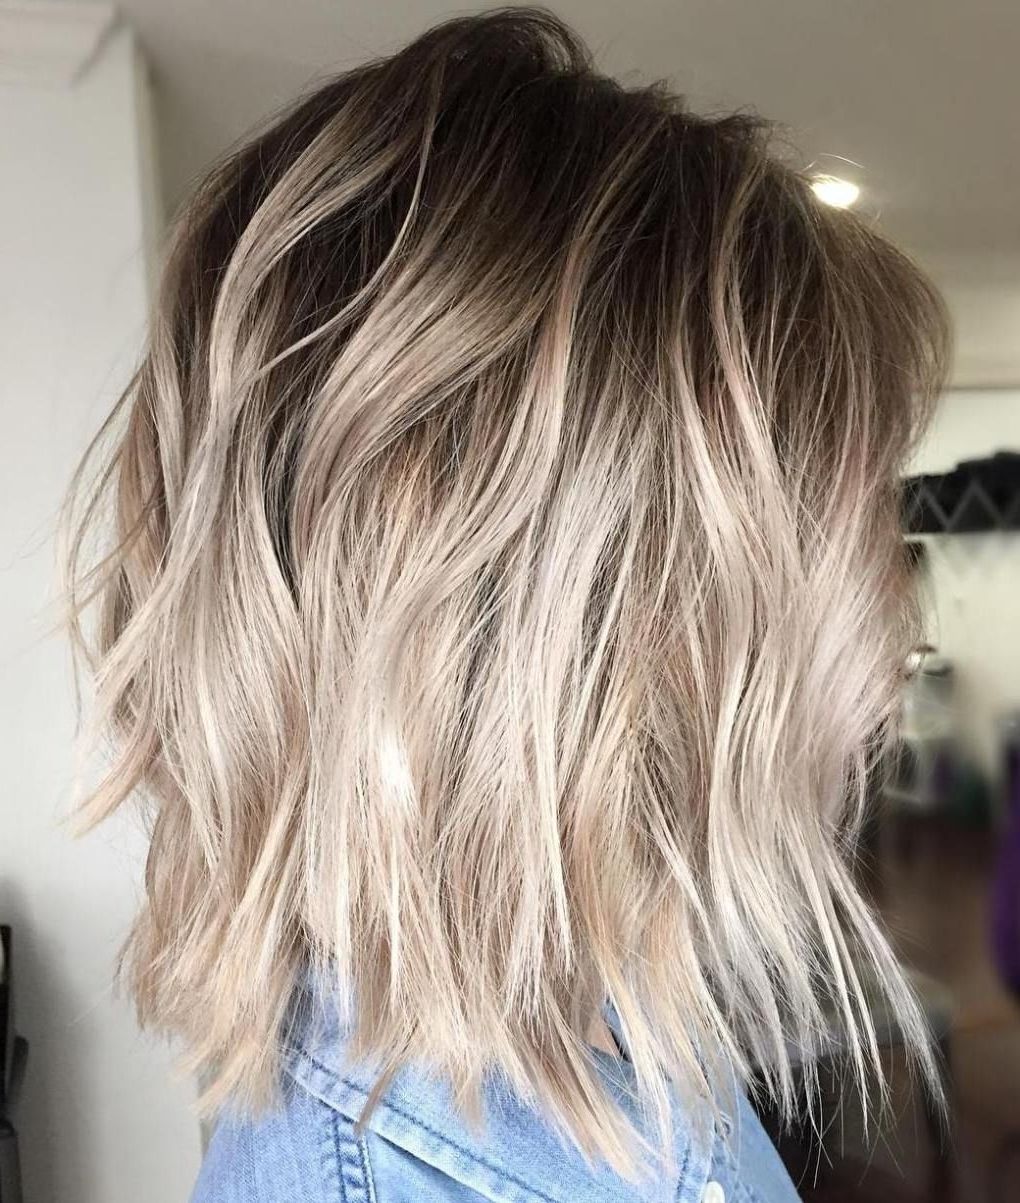 40 Beautiful Blonde Balayage Looks | Projects To Try | Pinterest Within 2018 Feathered Pixie Haircuts With Balayage Highlights (View 13 of 15)